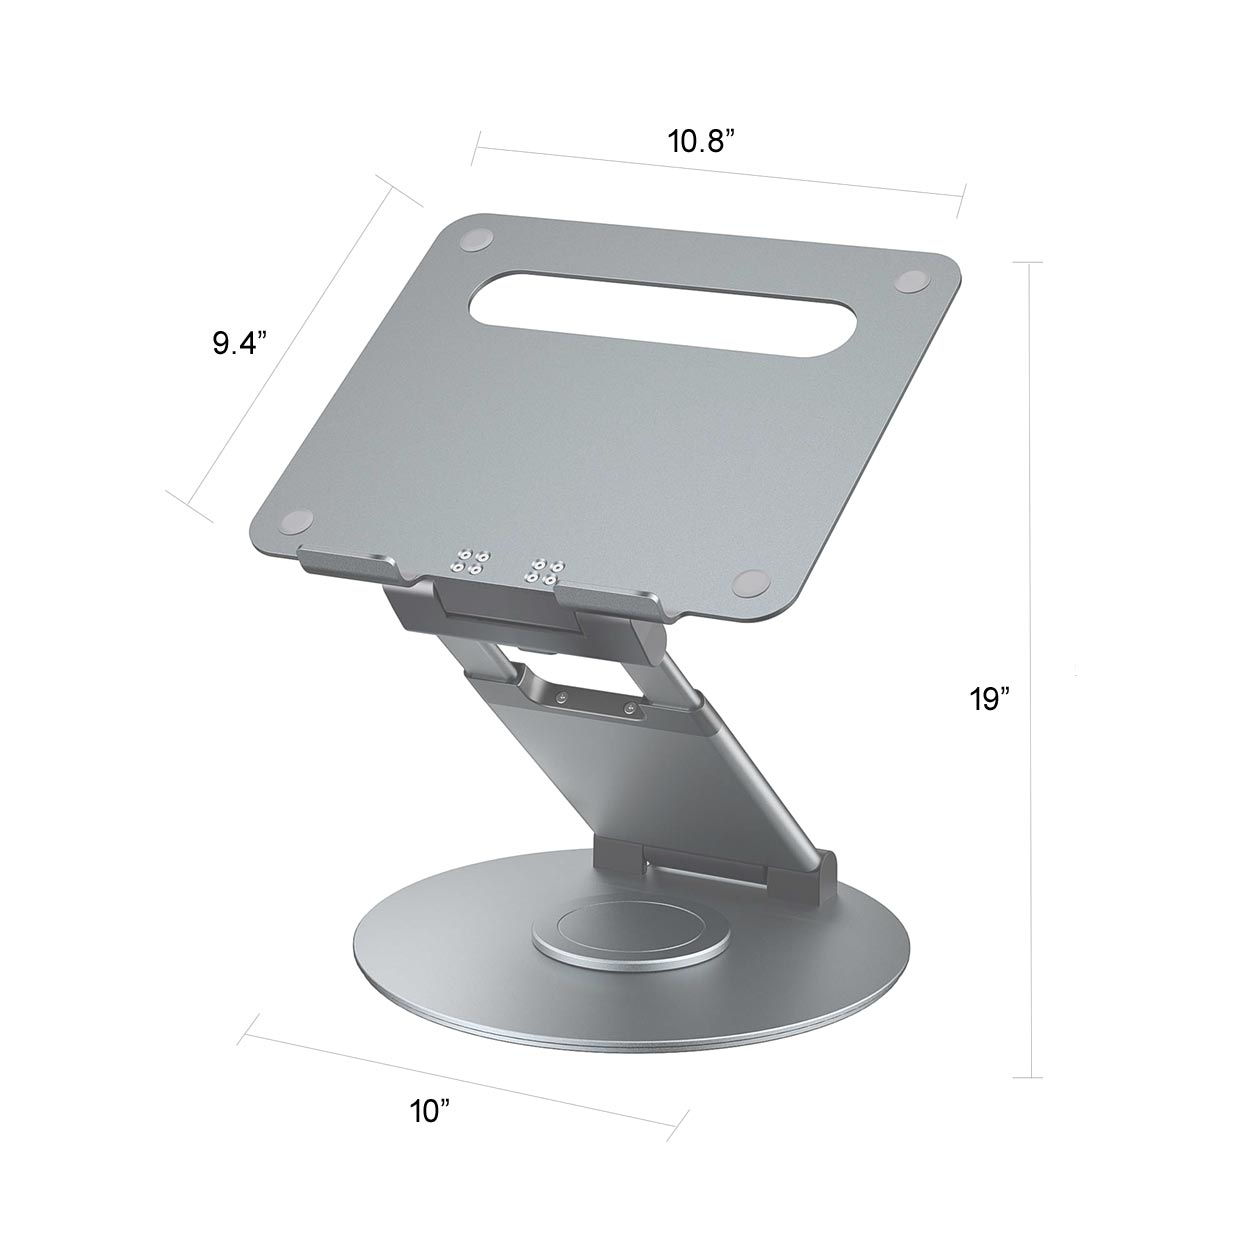 Ergonomic Laptop Stand with 360 Rotating Base and Adjustable Height - 9